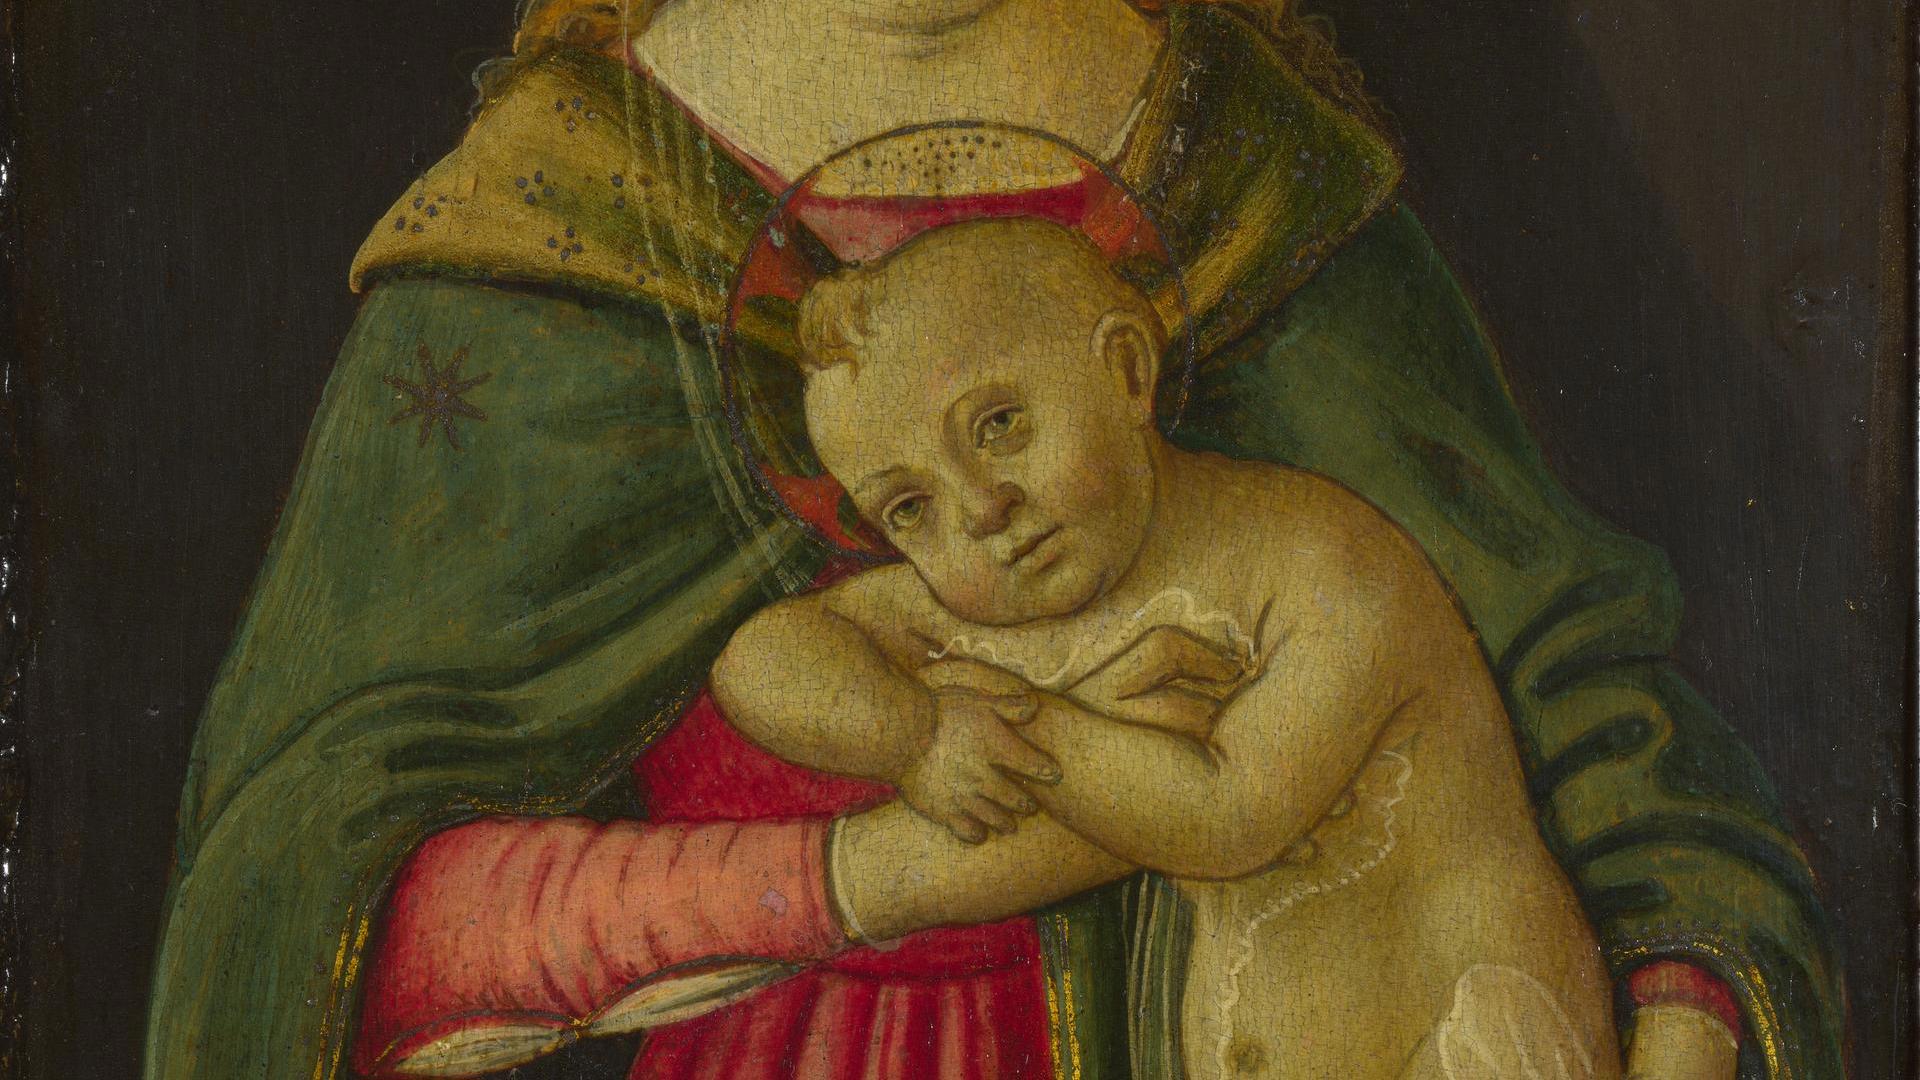 The Virgin and Child by Follower of Sandro Botticelli